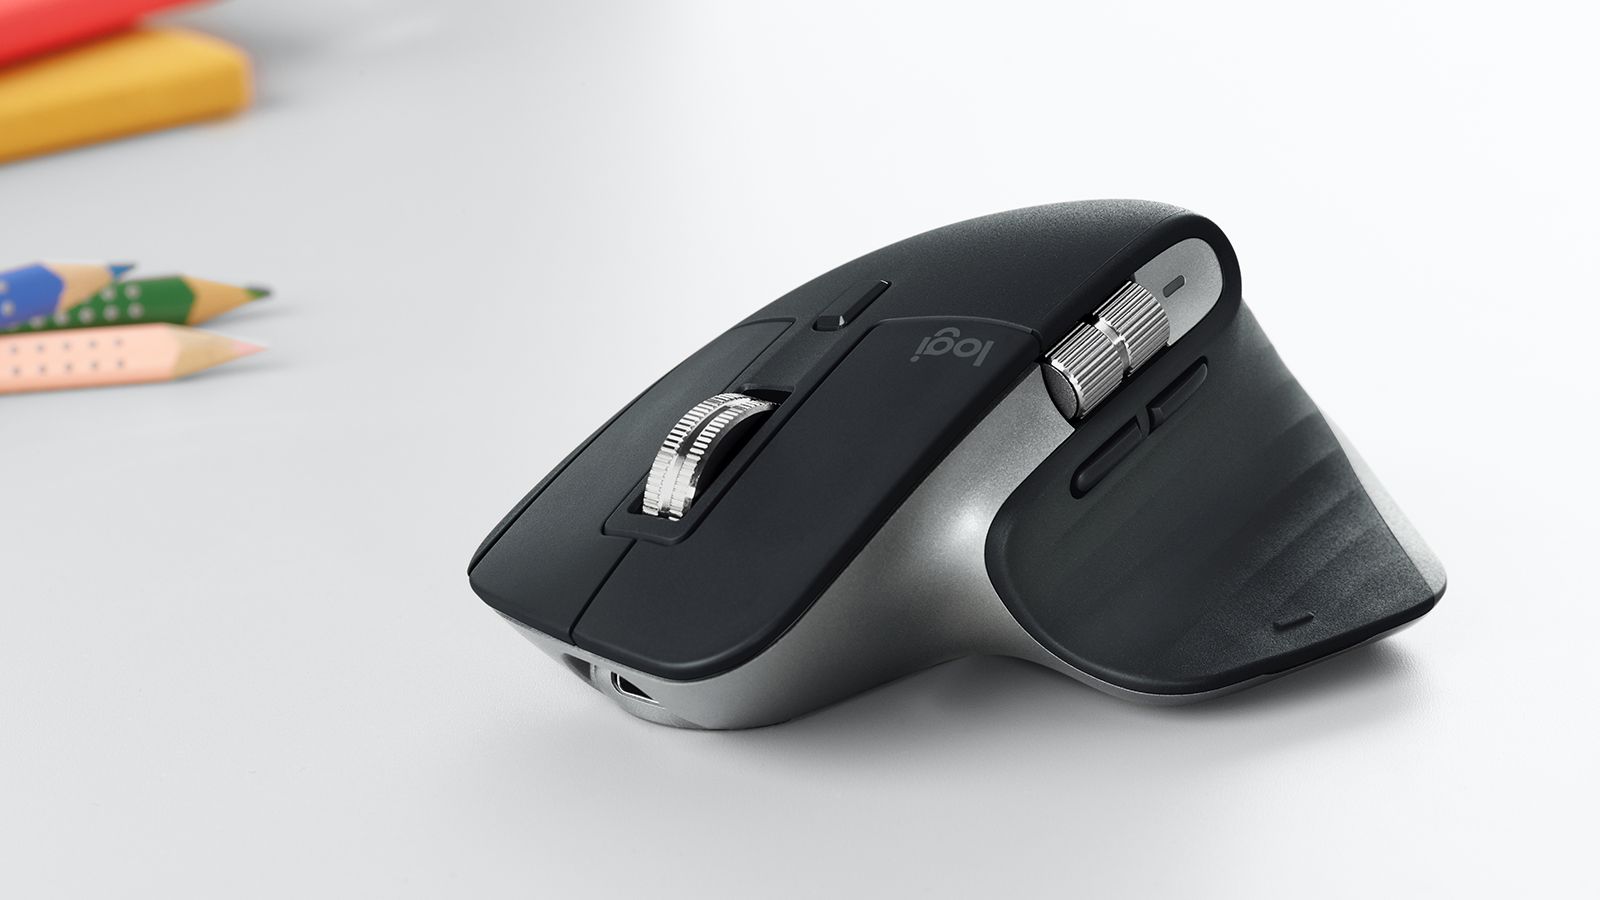 How To Program Gaming Mouse For Autocad